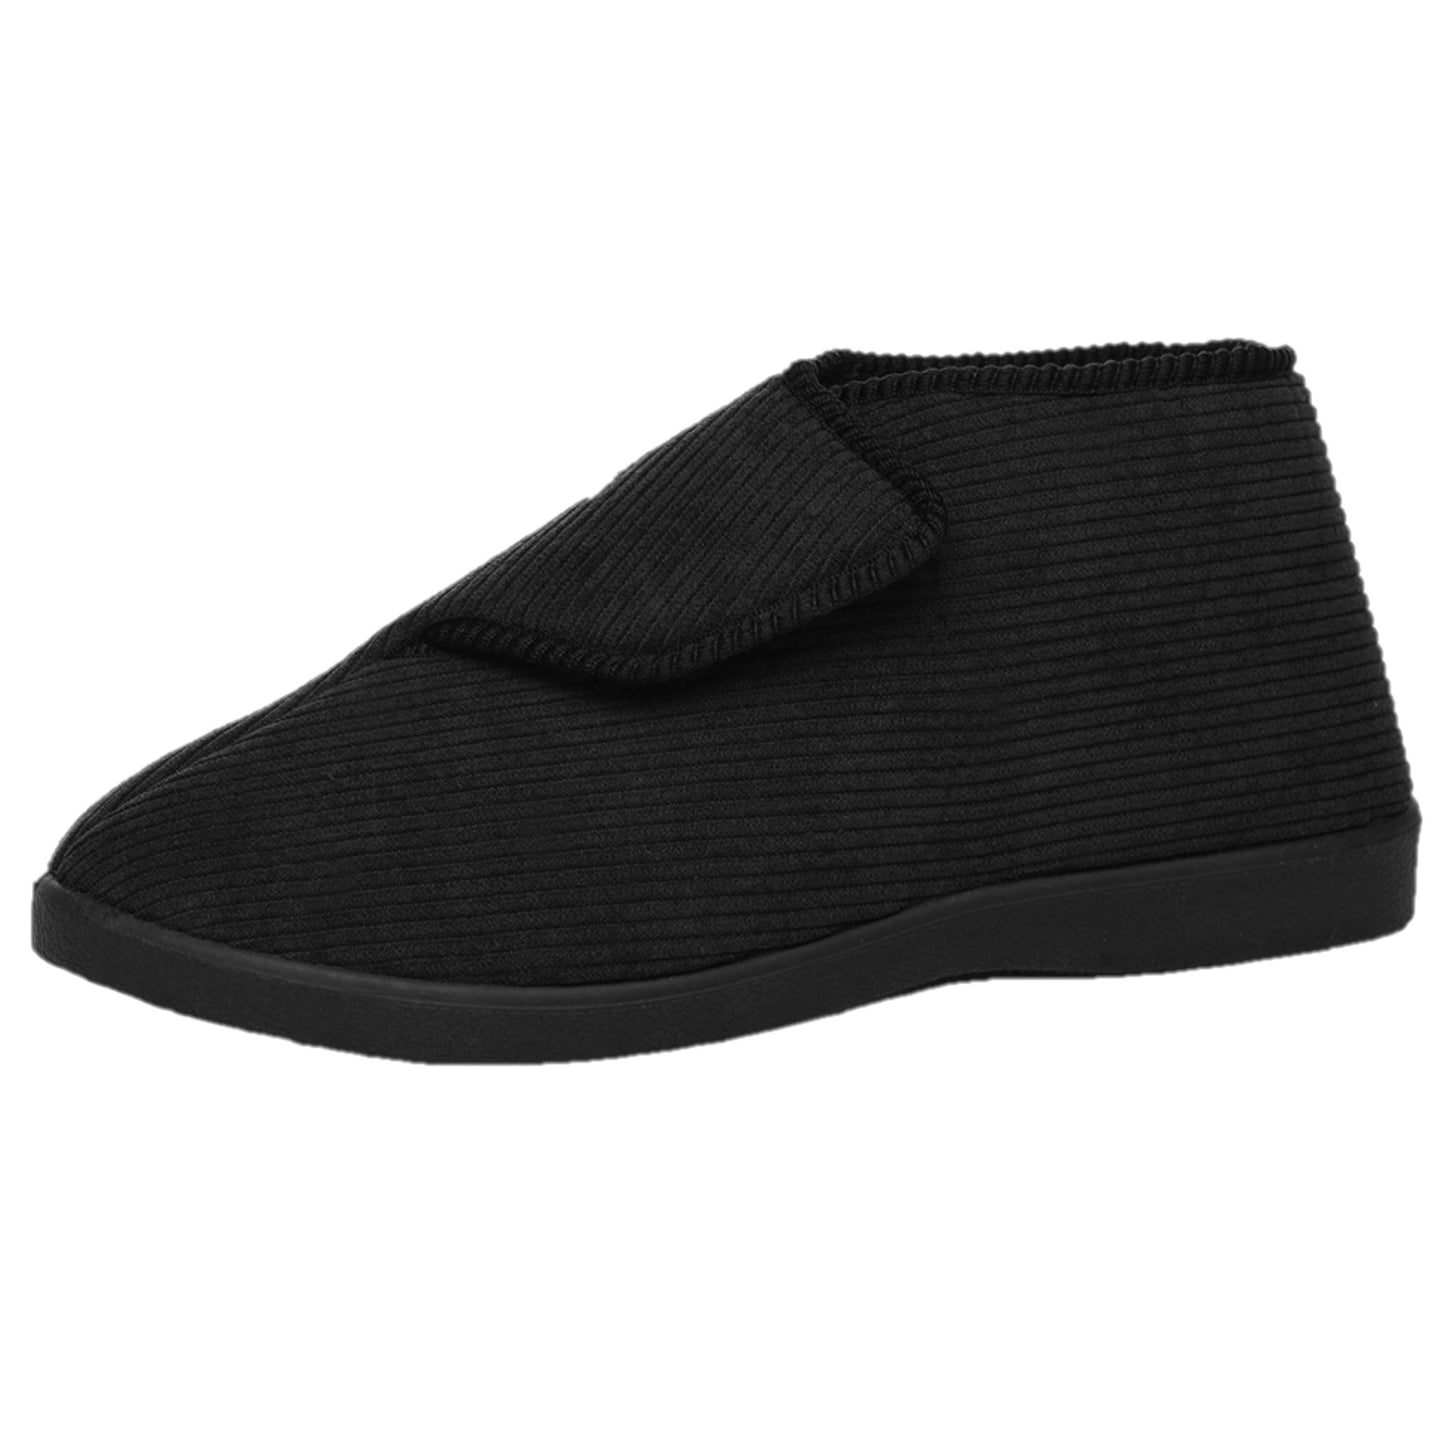 Men's Cord Adjustable Easy Close Bootie Slippers with Fleece Lining